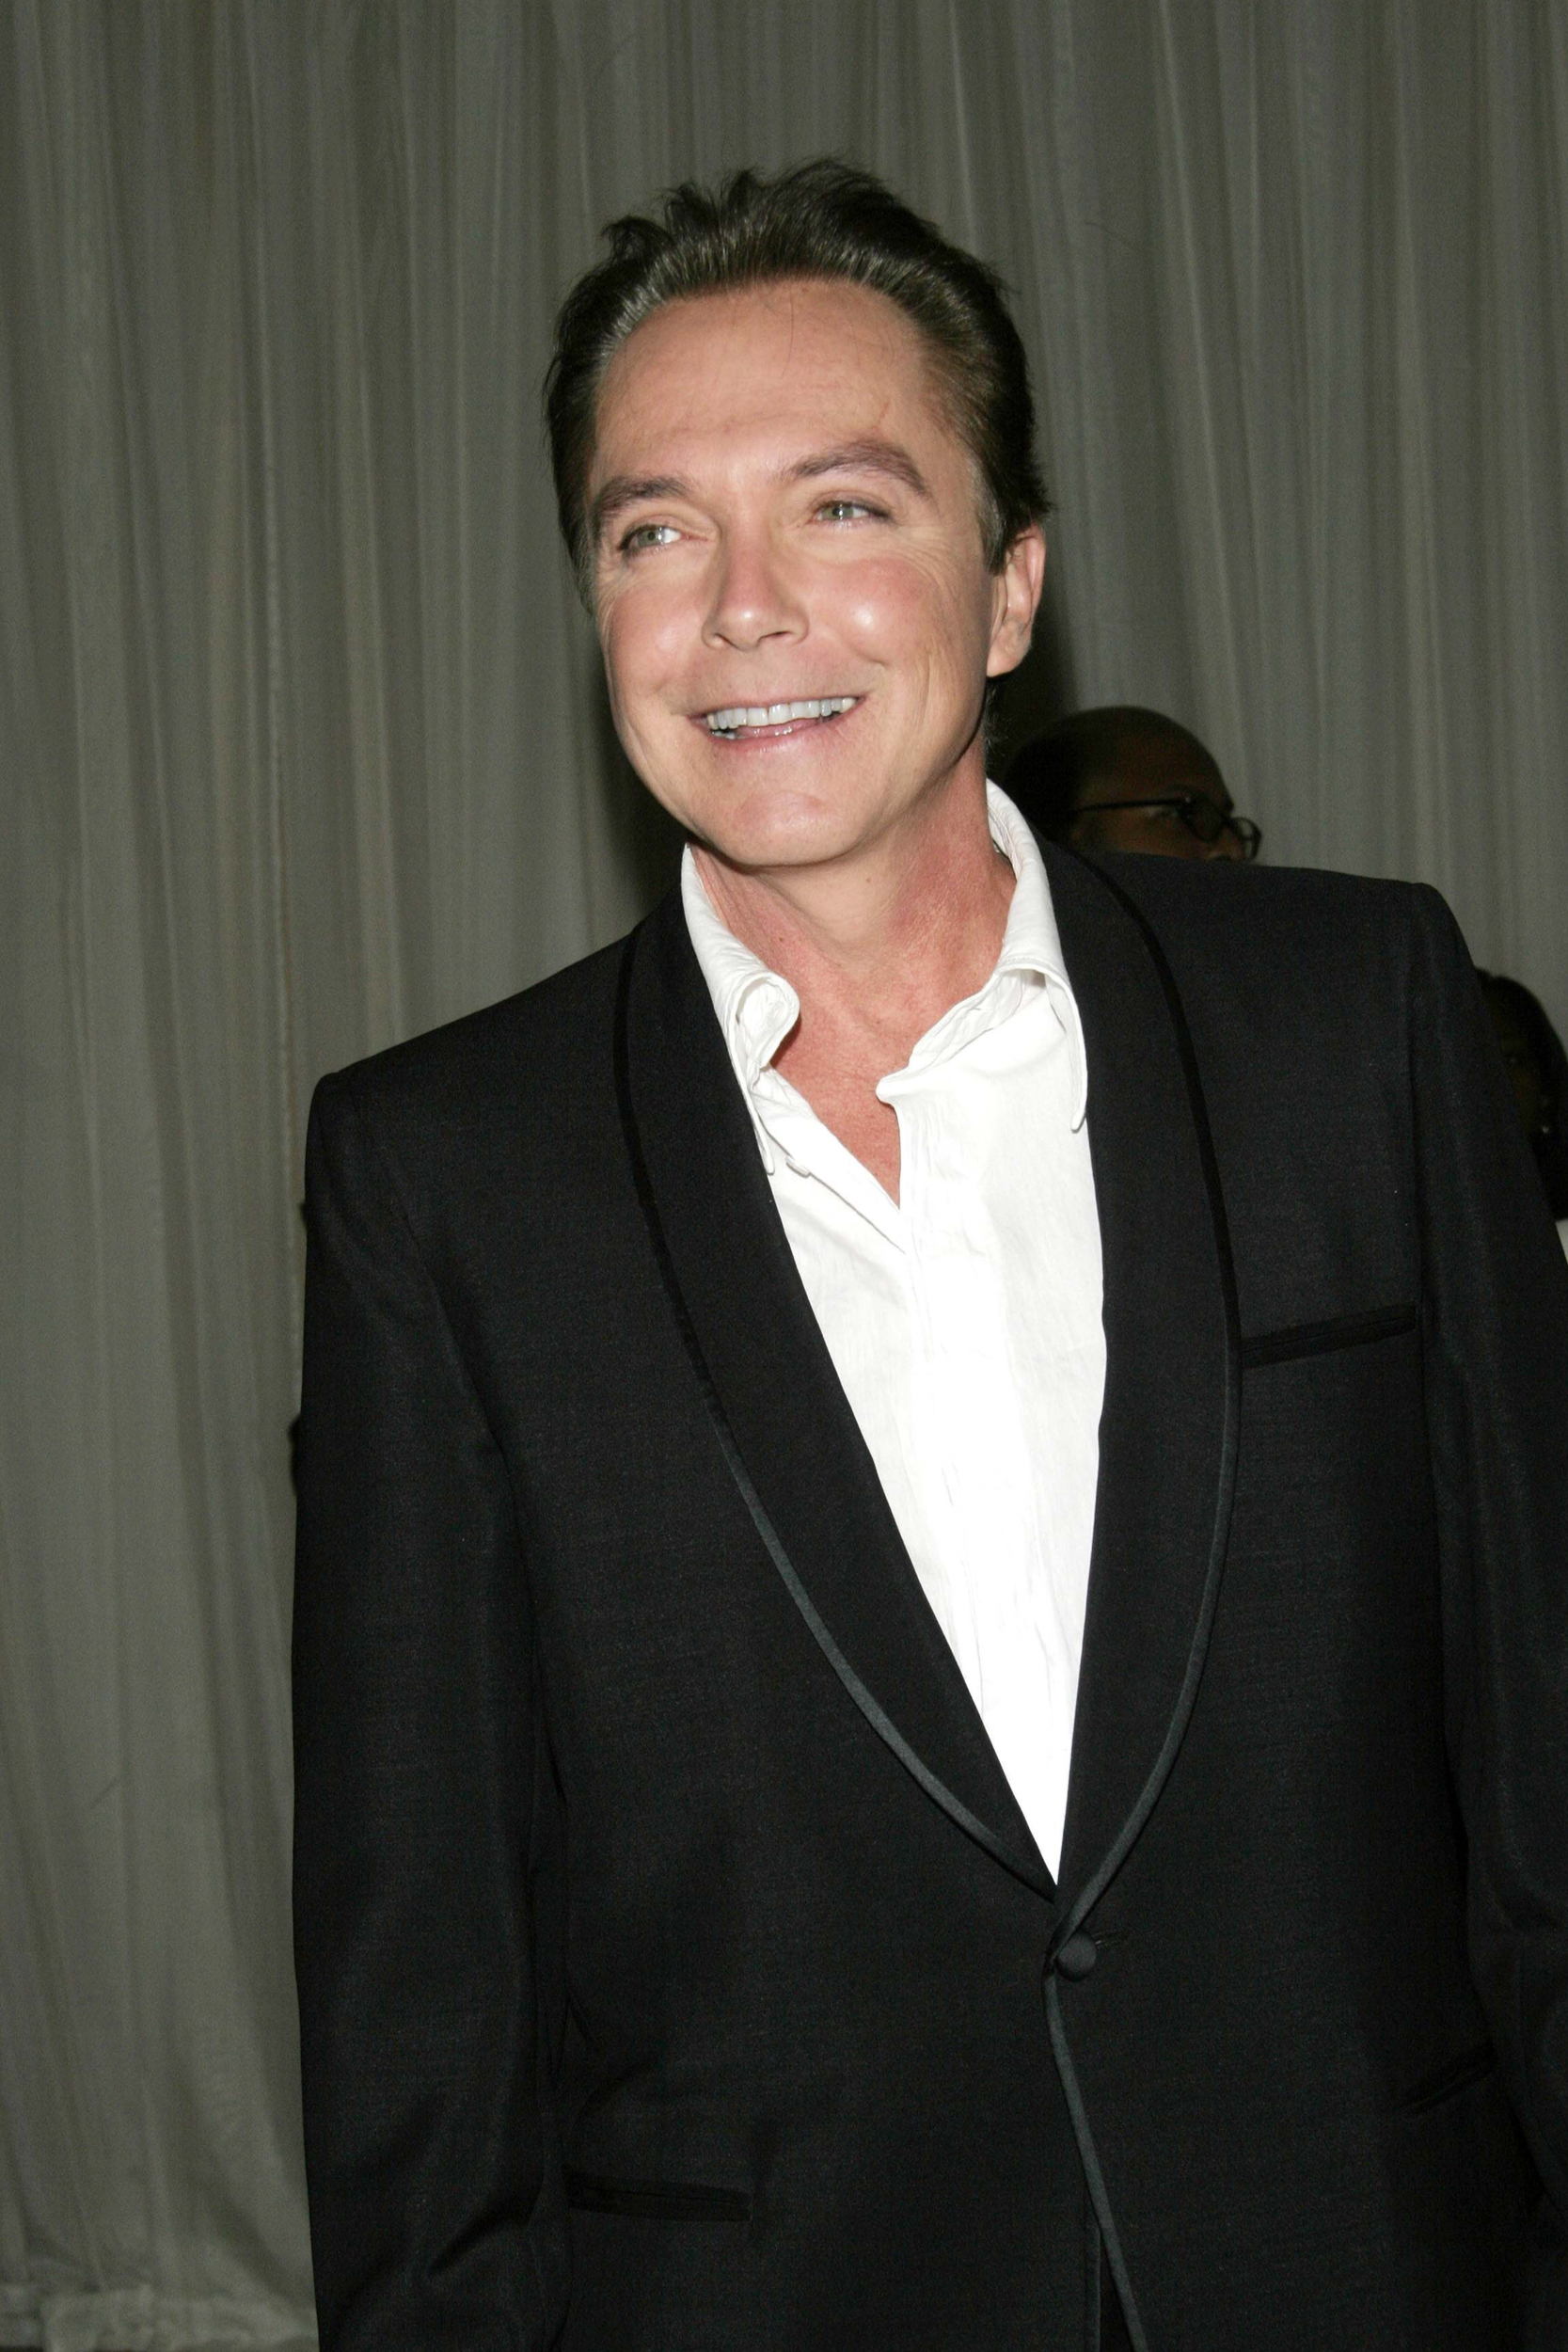 Where Is David Cassidy Buried?